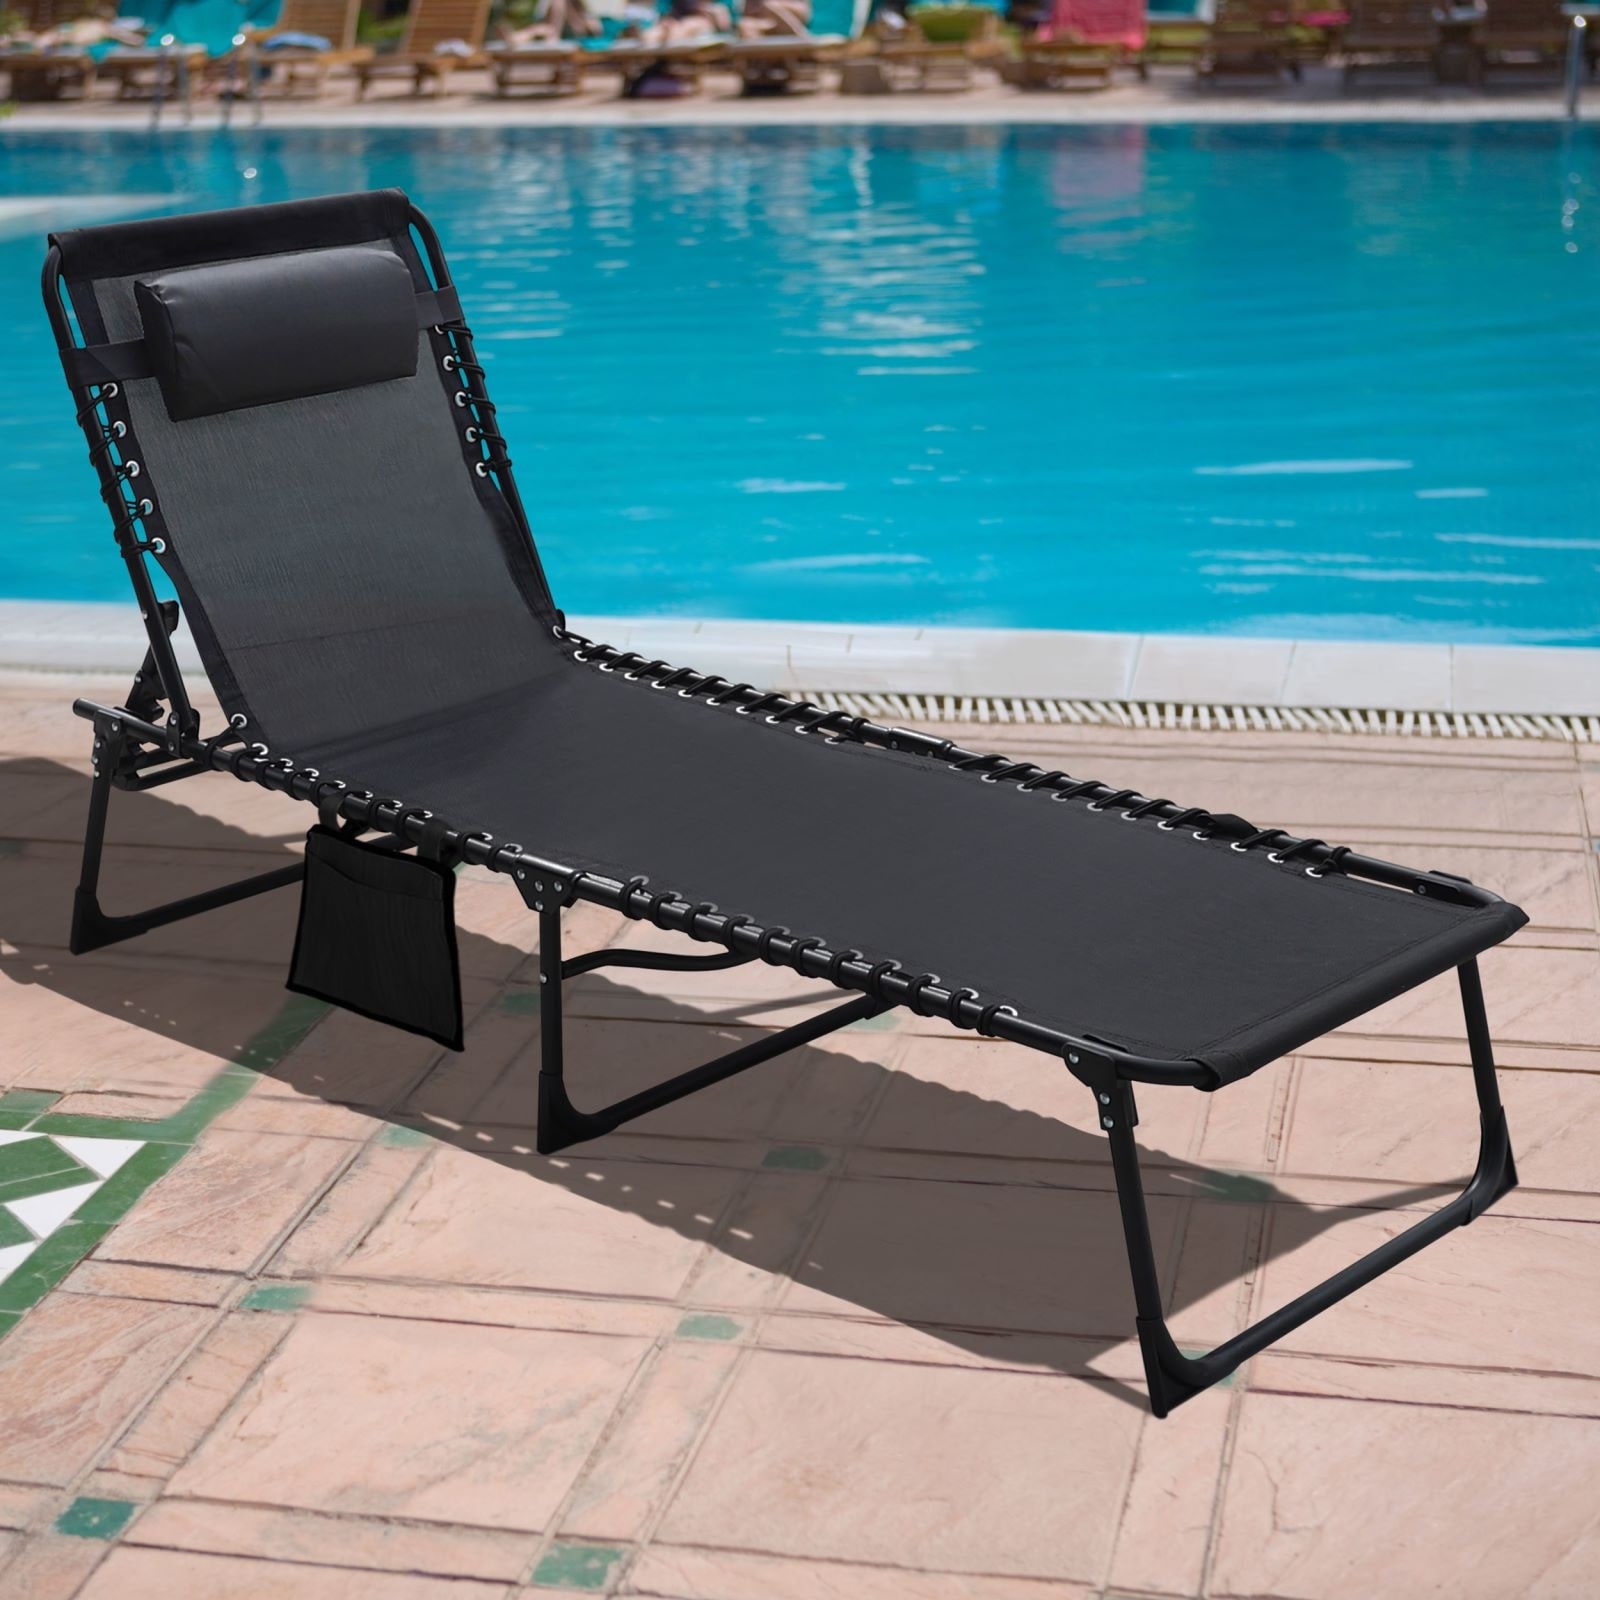 Veikous 4-fold Patio Chaise Lounge Chair For Outdoor With Detachable Pocket And Pillow